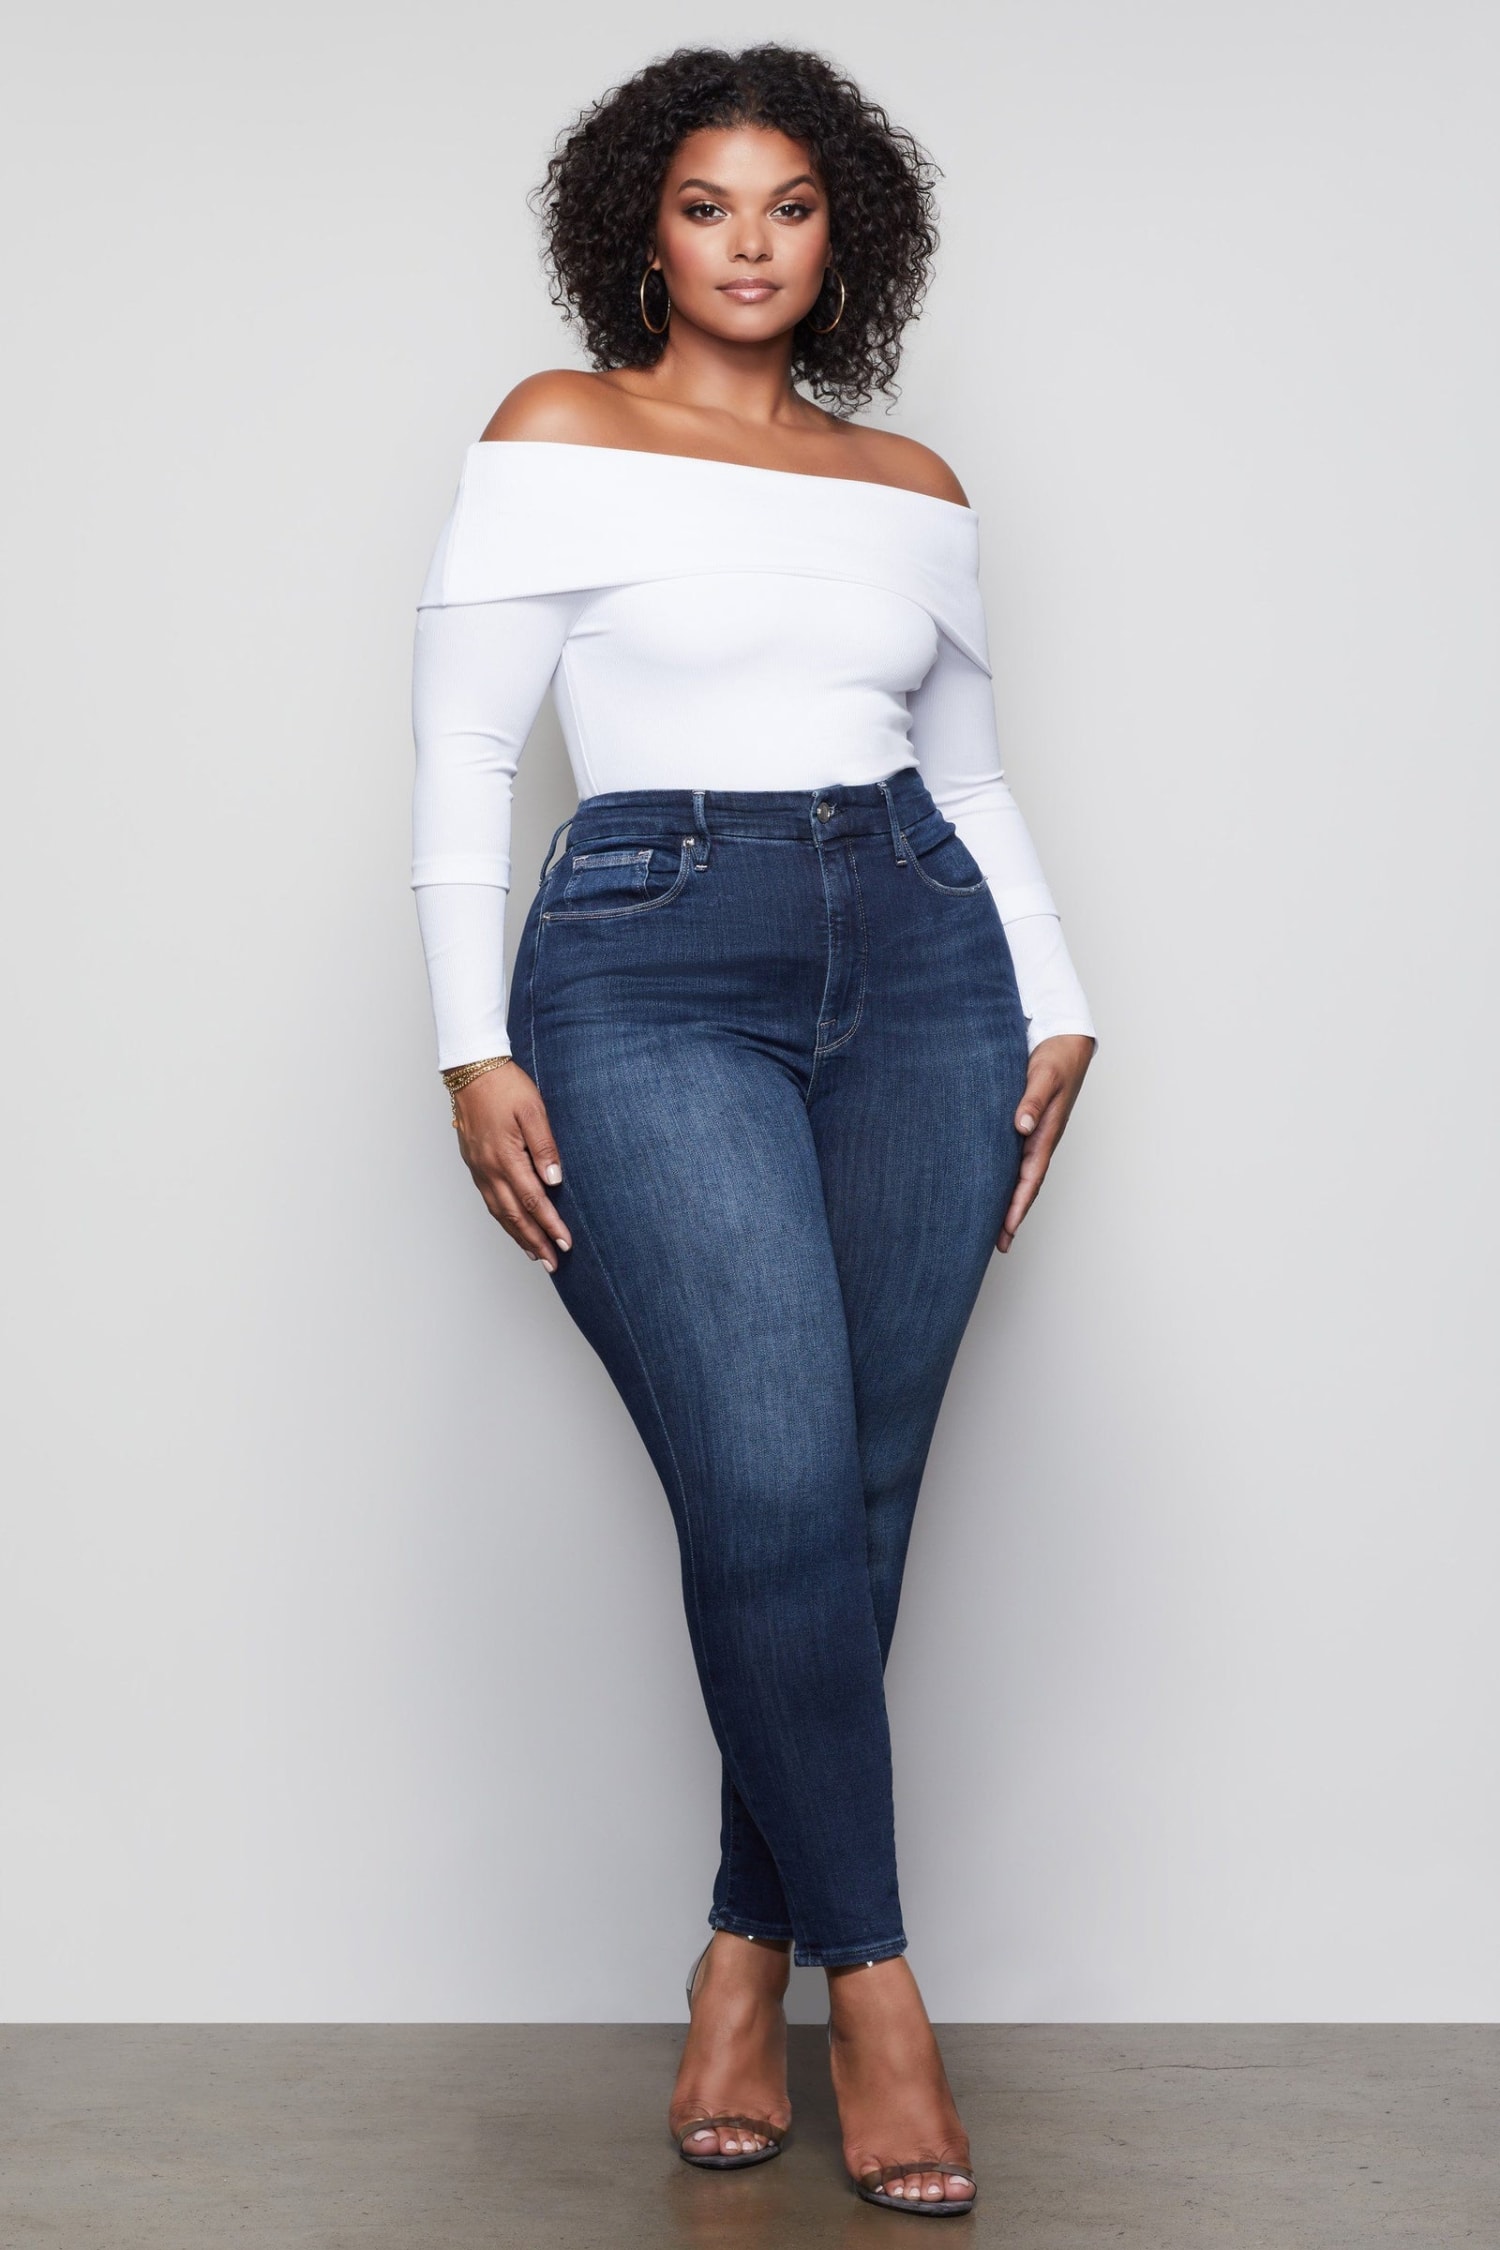 High Waisted Jeans For Curvy Body | peacecommission.kdsg.gov.ng